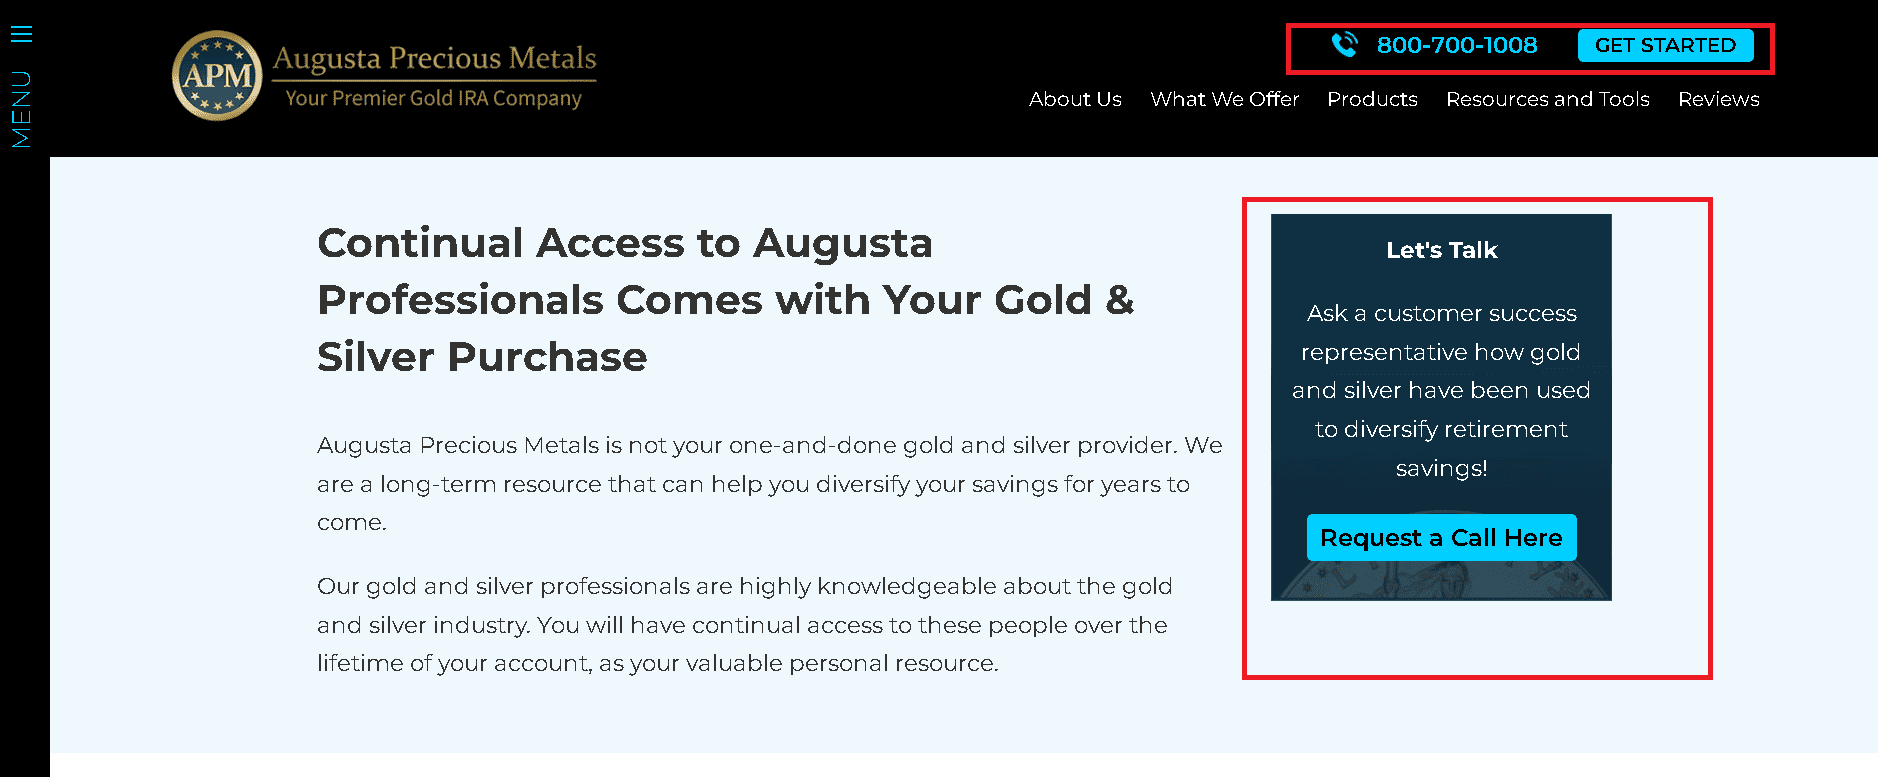 Contact Augusta Precious Metals and get assigned a personal agent to discuss your gold IRA options